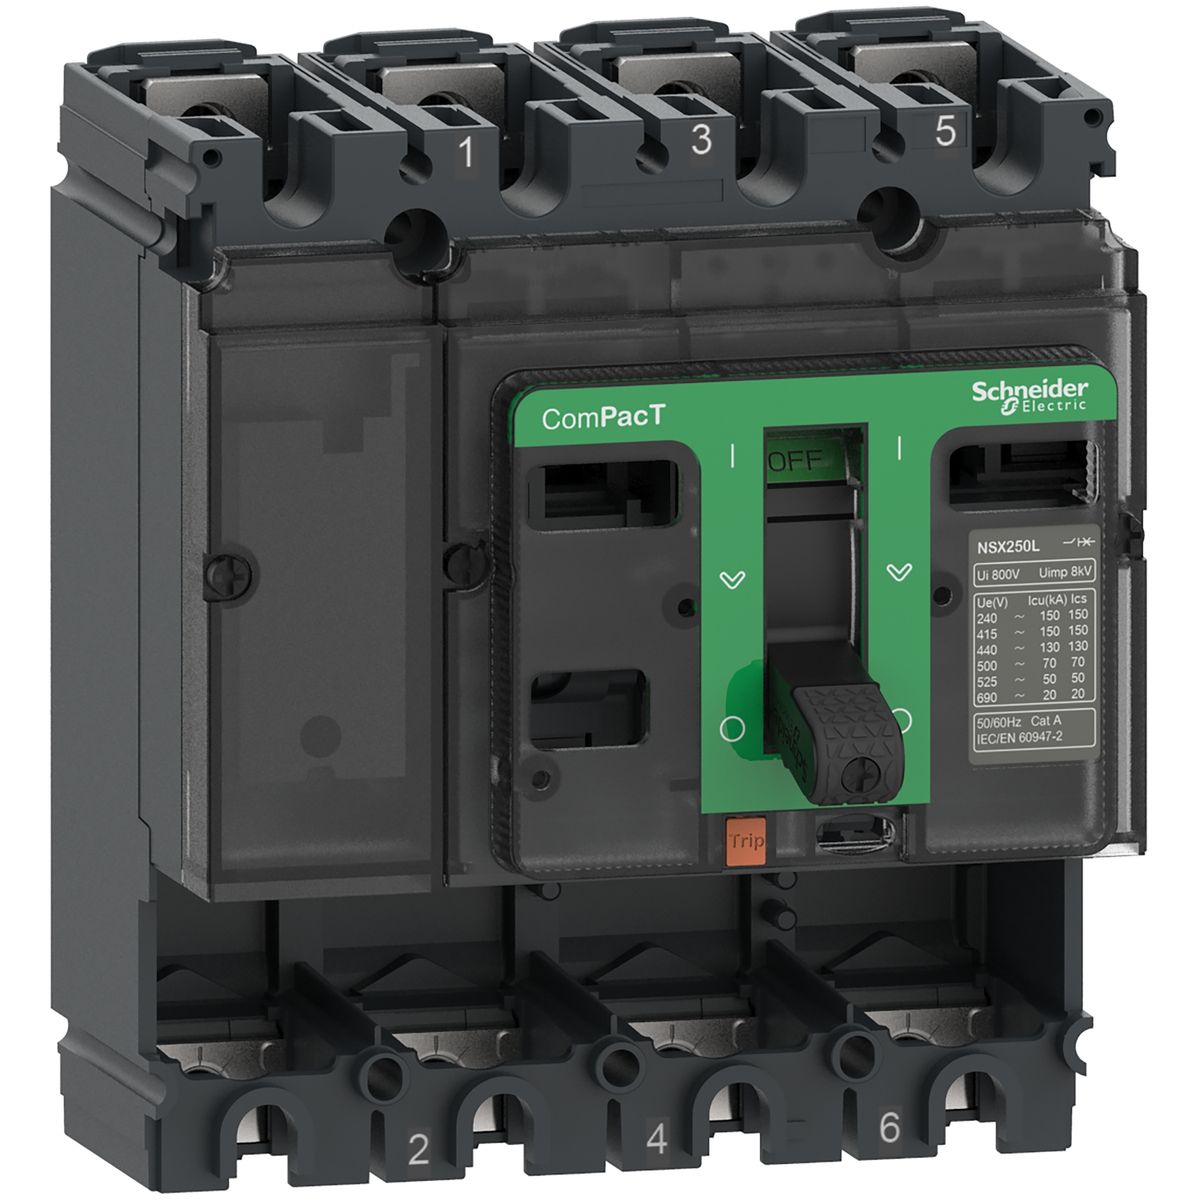 C16F4 - Circuit breaker basic frame, ComPacT NSX160F, 36kA/415VAC, 4 poles, 160A frame rating, without trip unit - Schneider Electric - 0